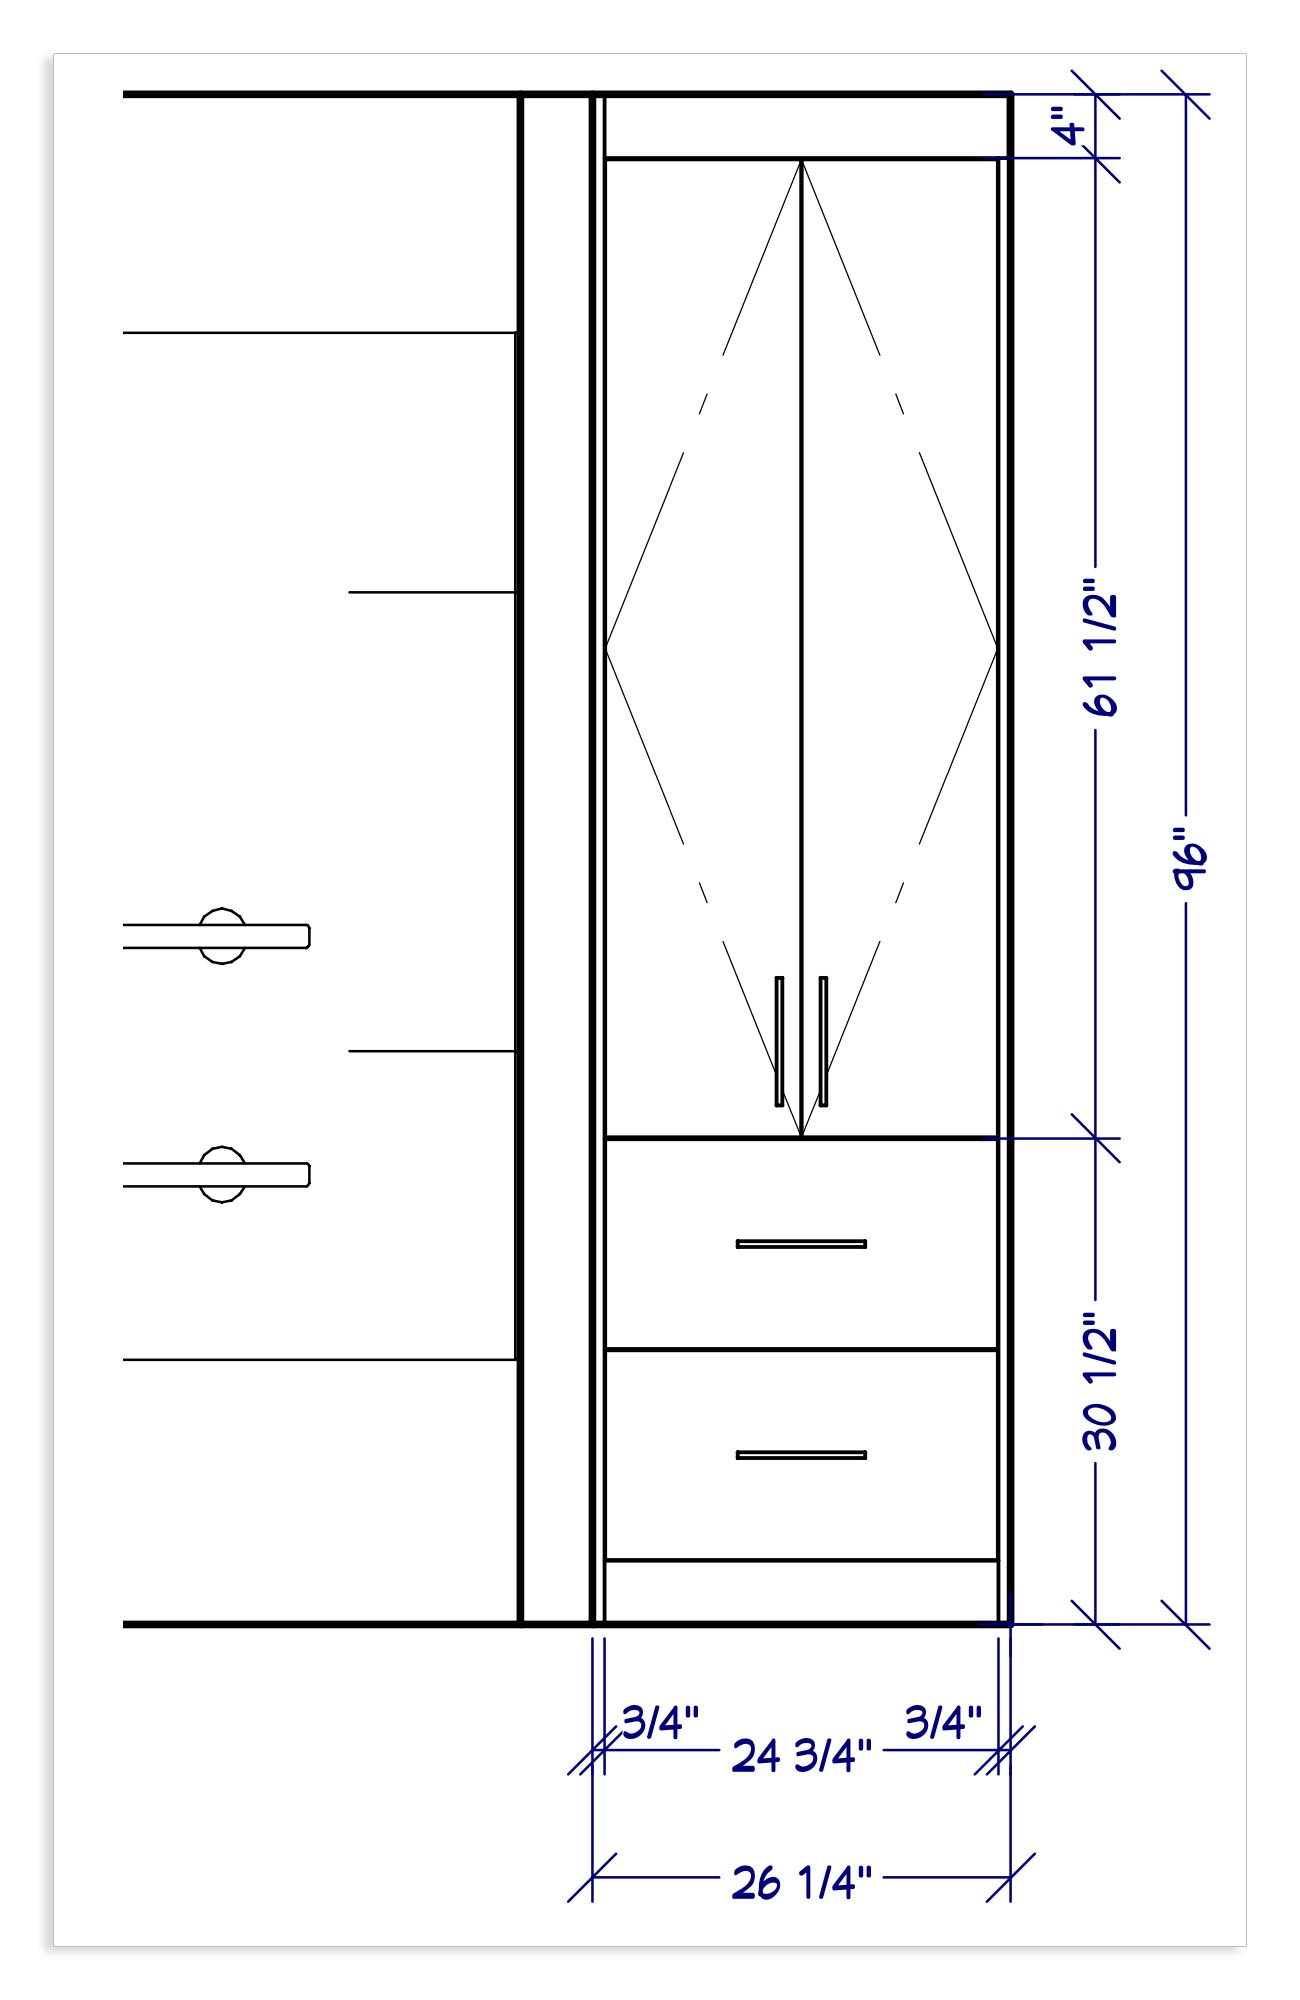 The details and dimensions of the custom linen closet cabinet. // via Yellow Brick Home